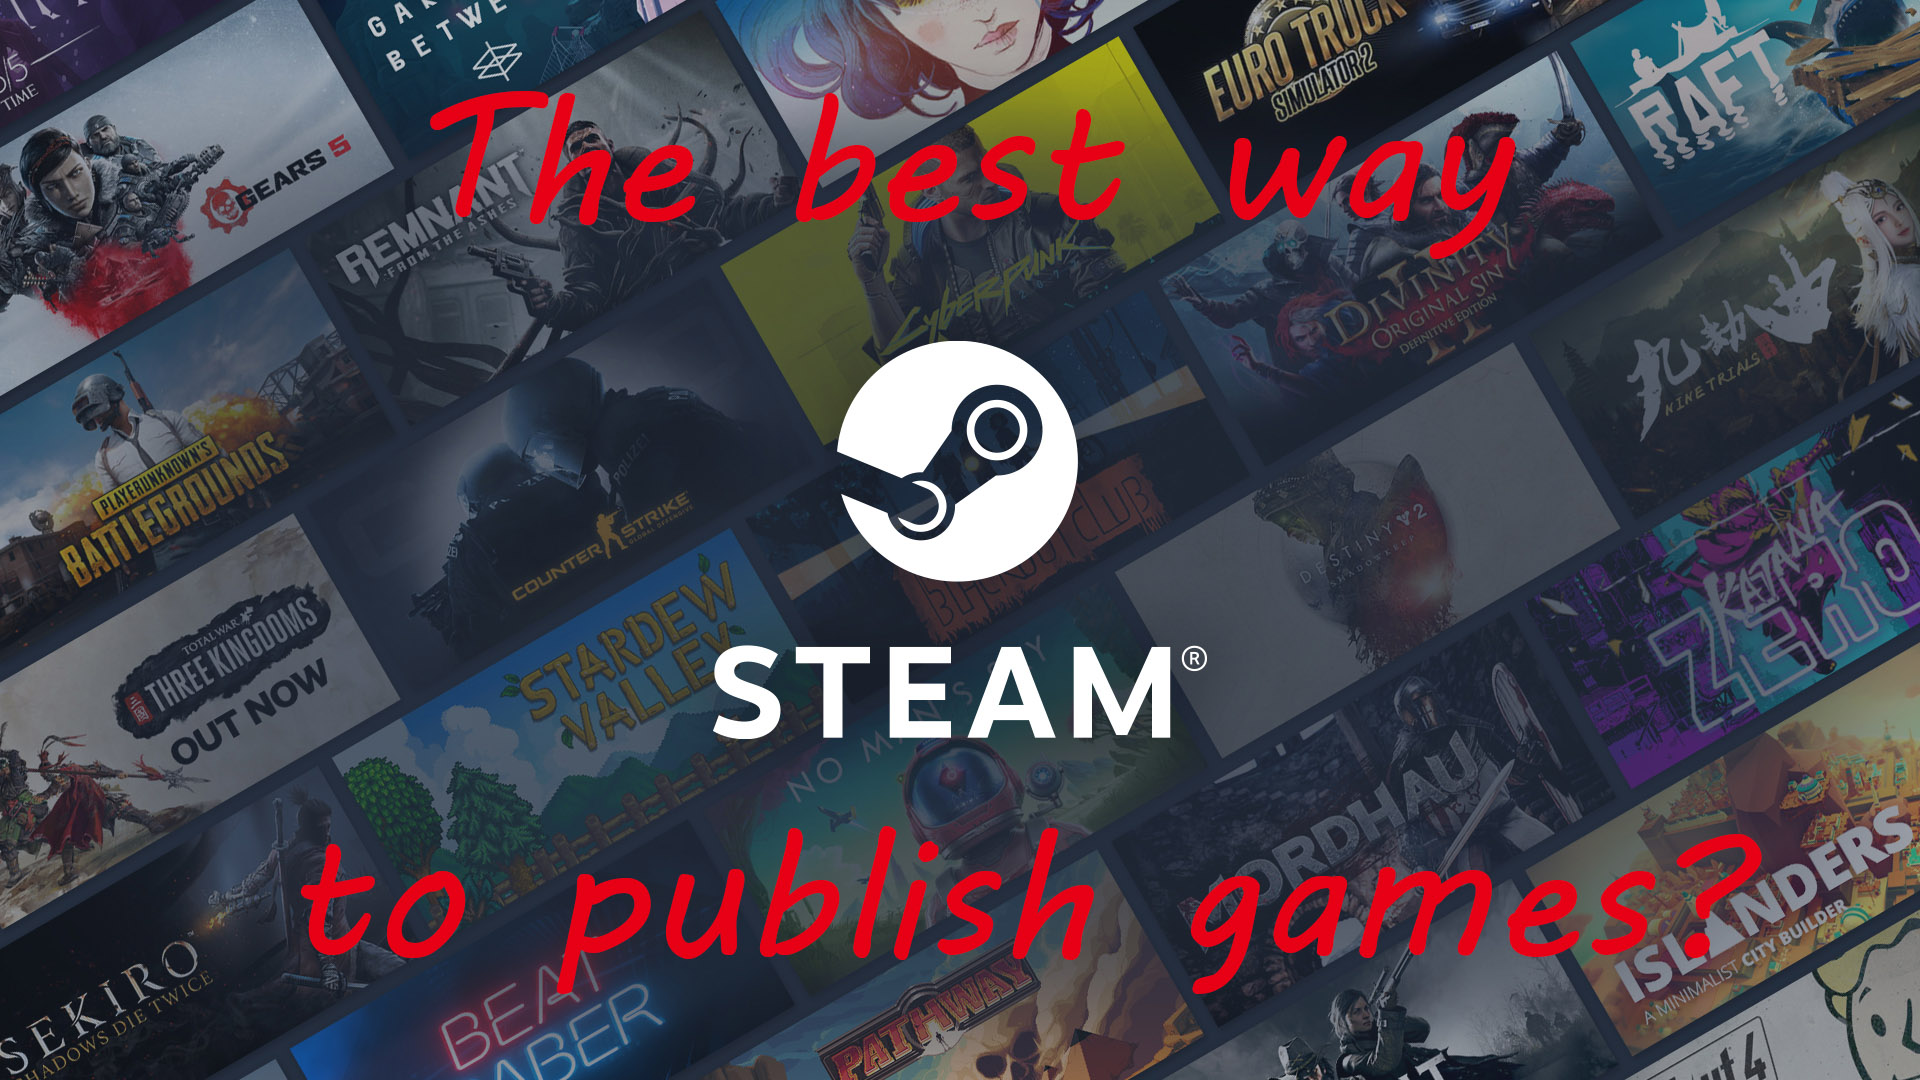 steam - Are review stats from web API outdated? - Stack Overflow